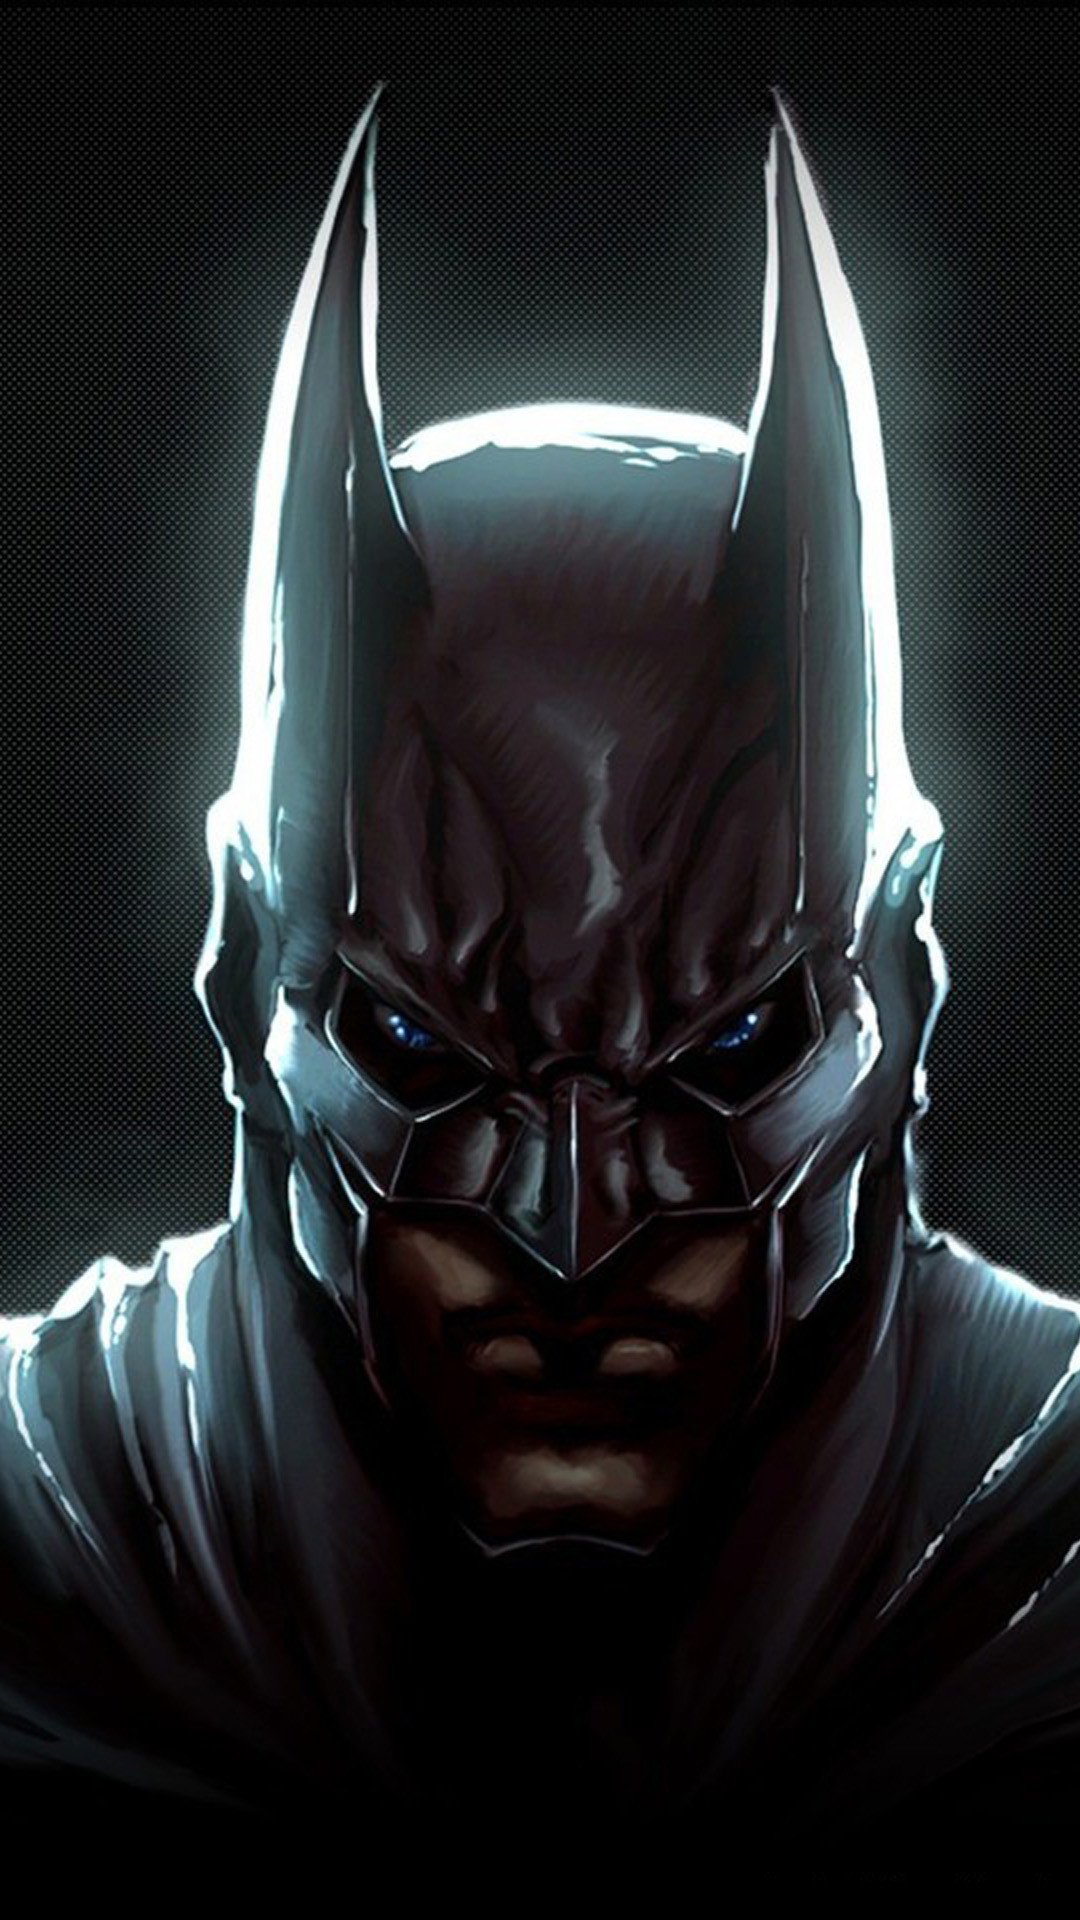 1080x1920 Batman 12 Games Galaxy wallpaper, Thousands of Galaxy Wallpapers fitted for  resolution.